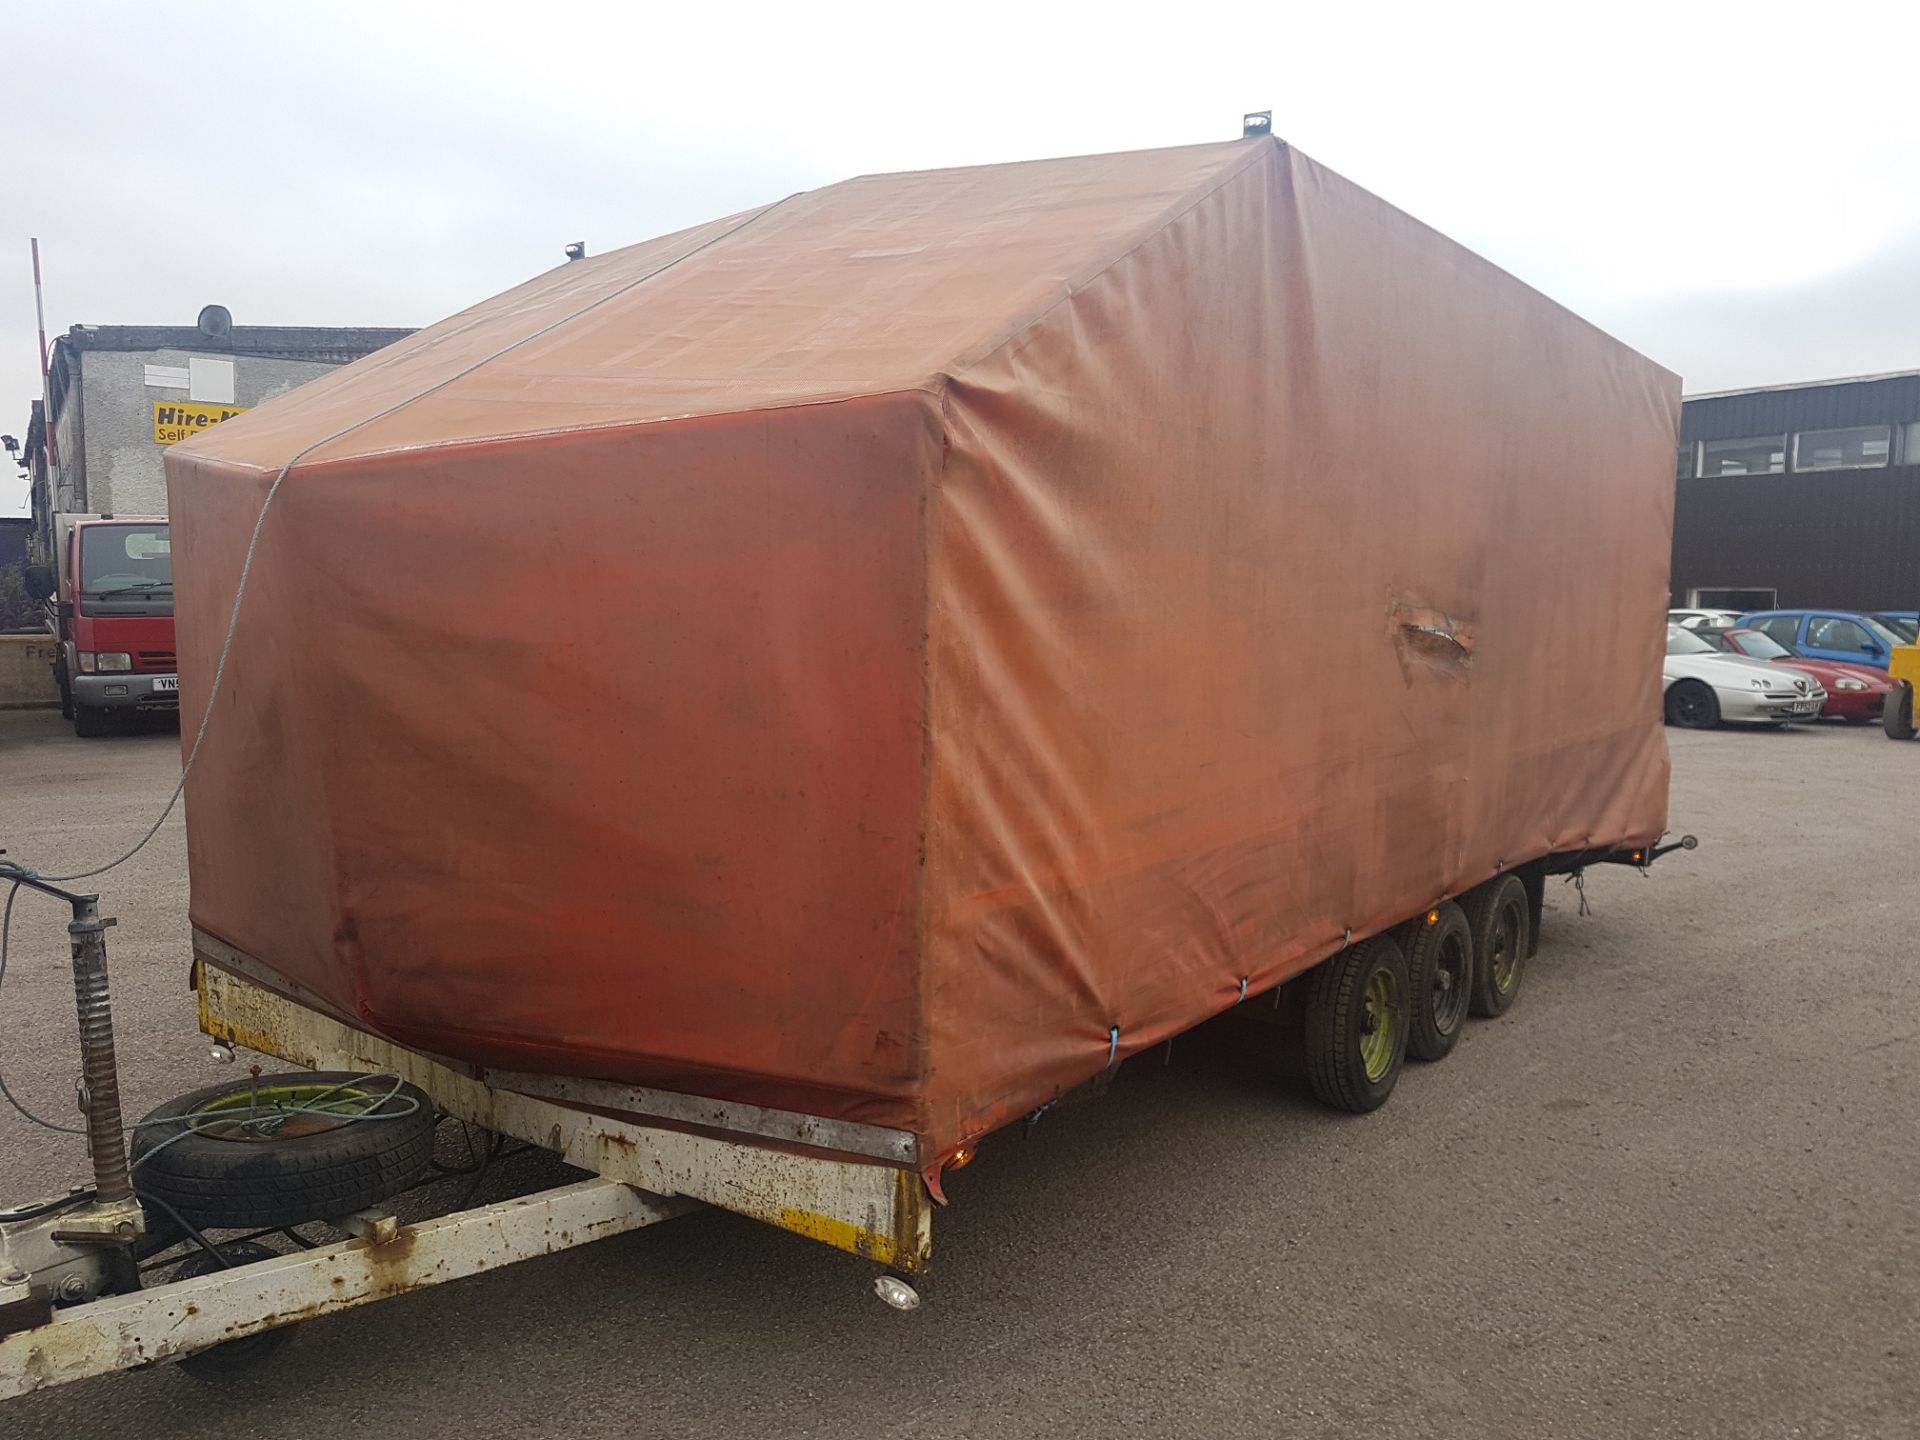 TRI-AXLE BEAVER-TAIL CAR TRANSPORTER COVERED TRAILER *PLUS VAT*   NEW AXLE SPRINGS, BRAKES AND LED - Image 3 of 13